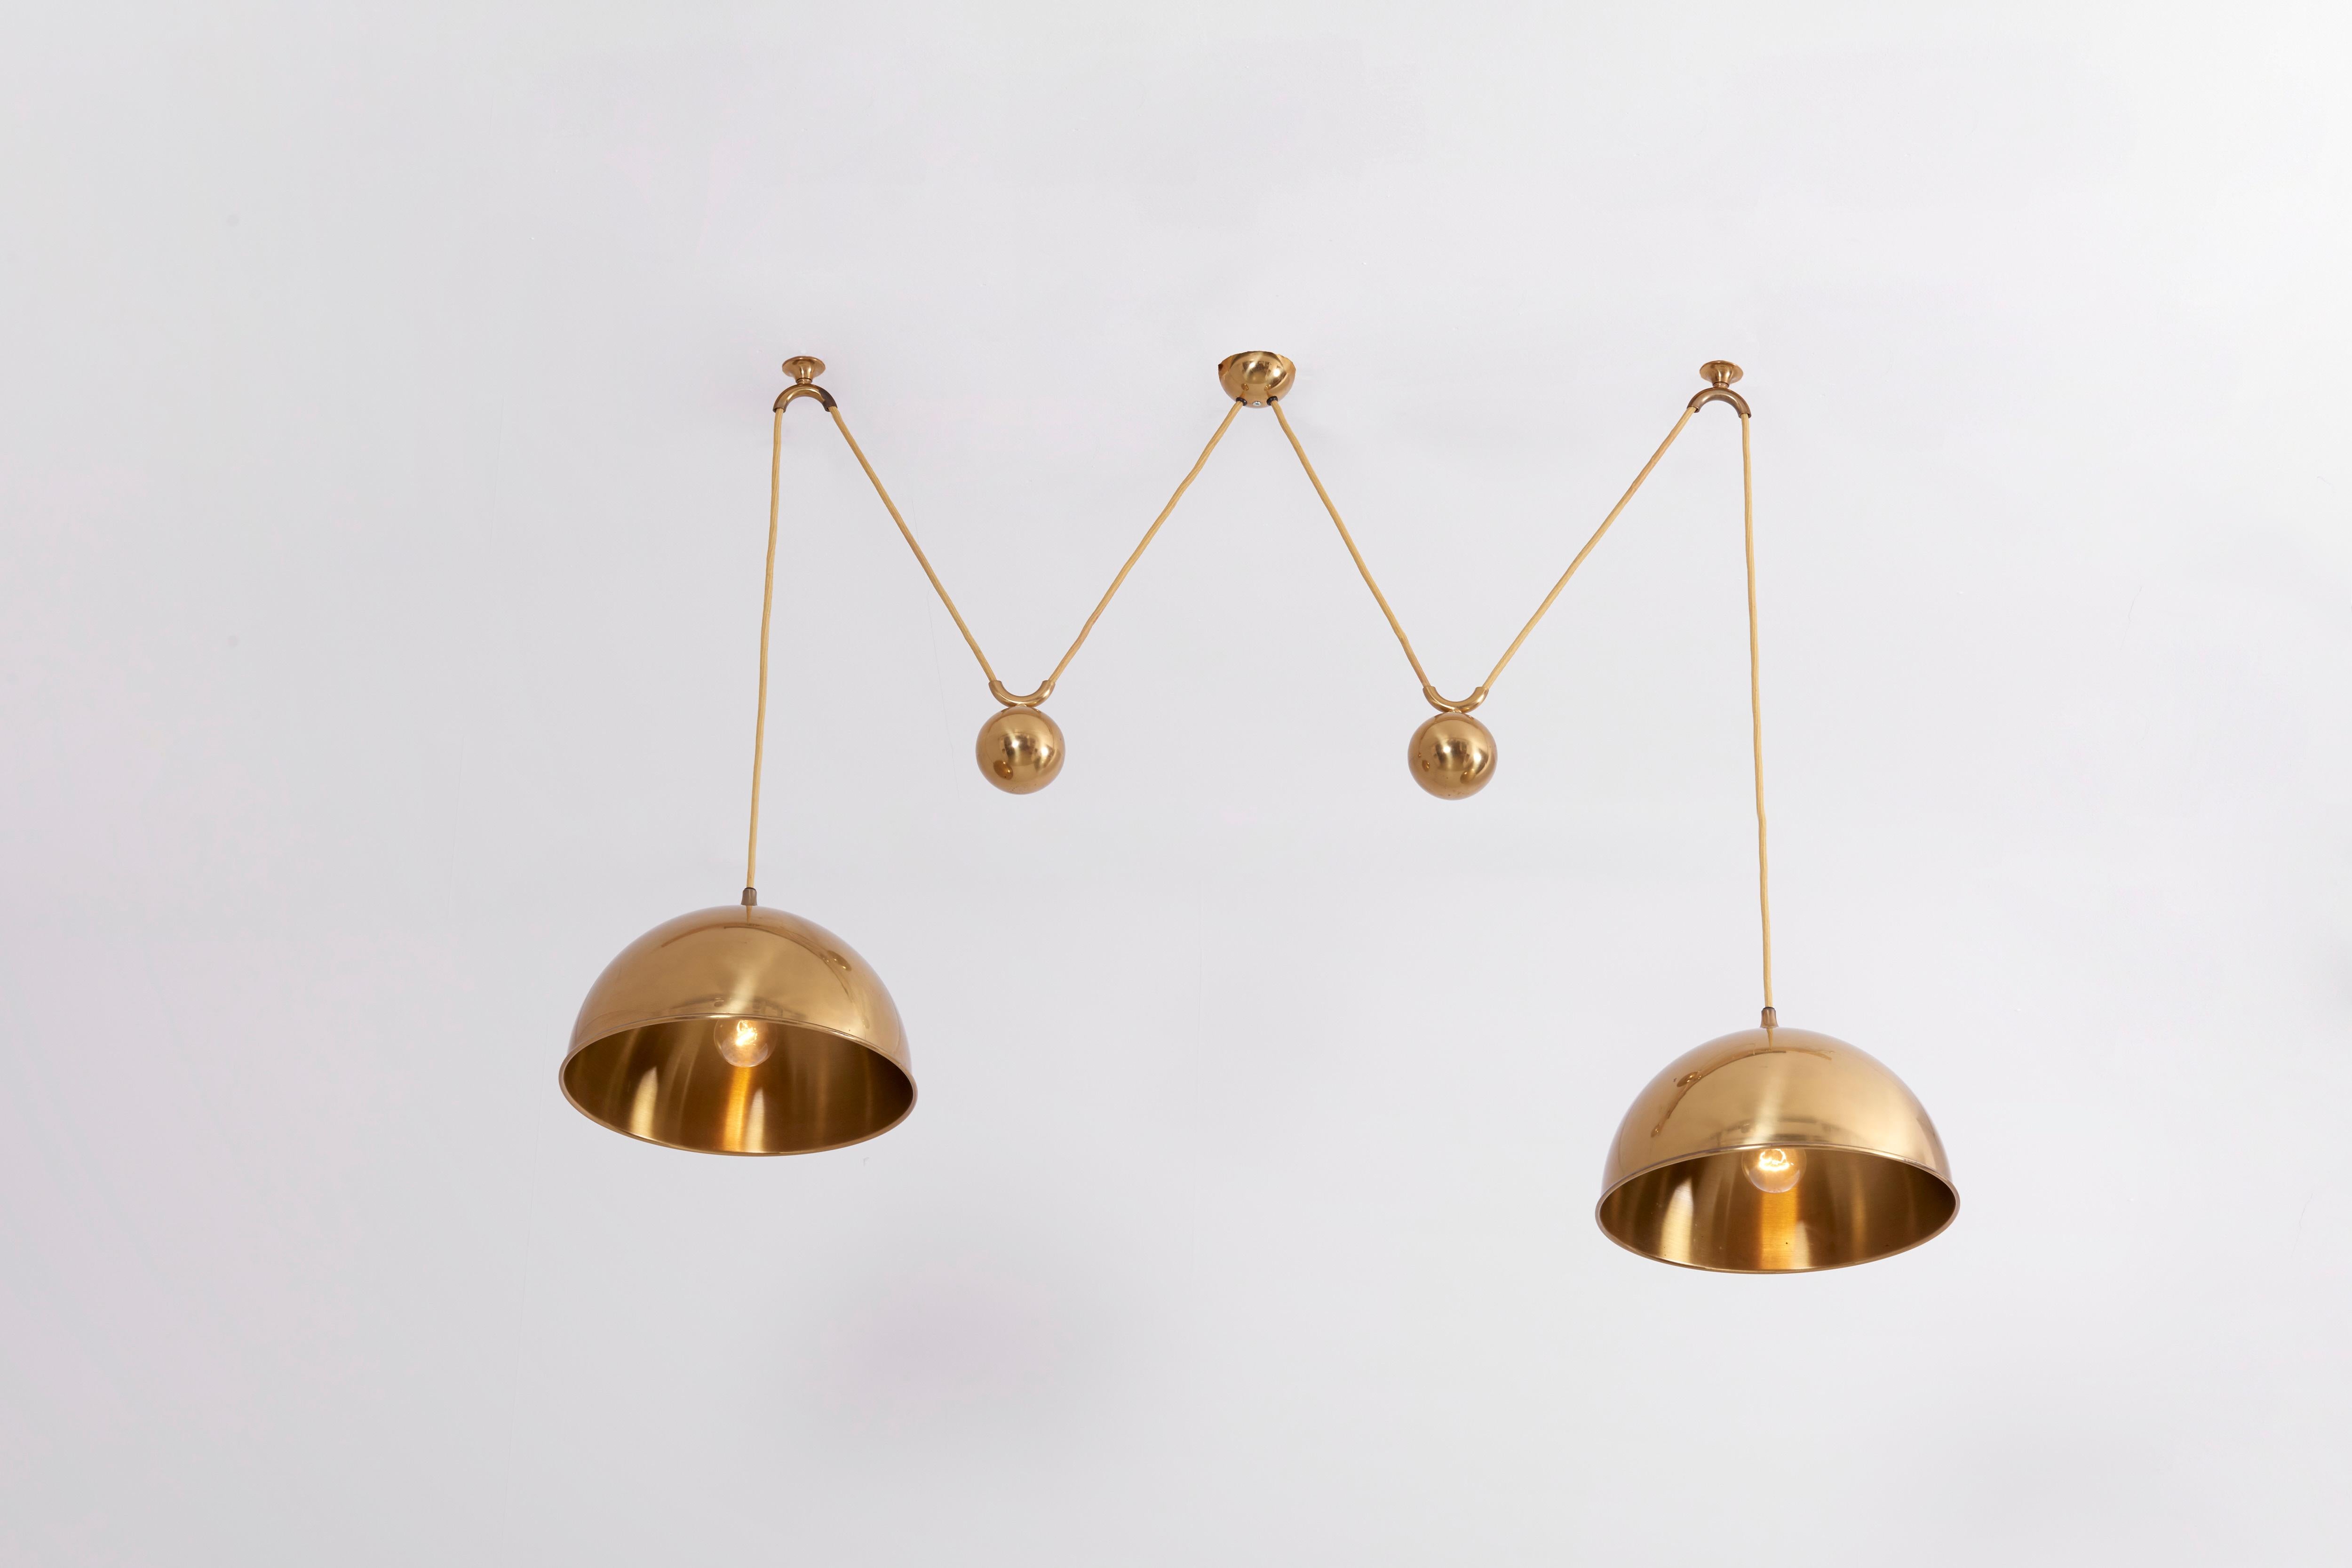 Beautiful Florian Schulz Double Posa pendant lamp in brass.

1 x E27 socket / each lamp shade.

Please note: Lamp should be fitted professionally in accordance to local requirements.